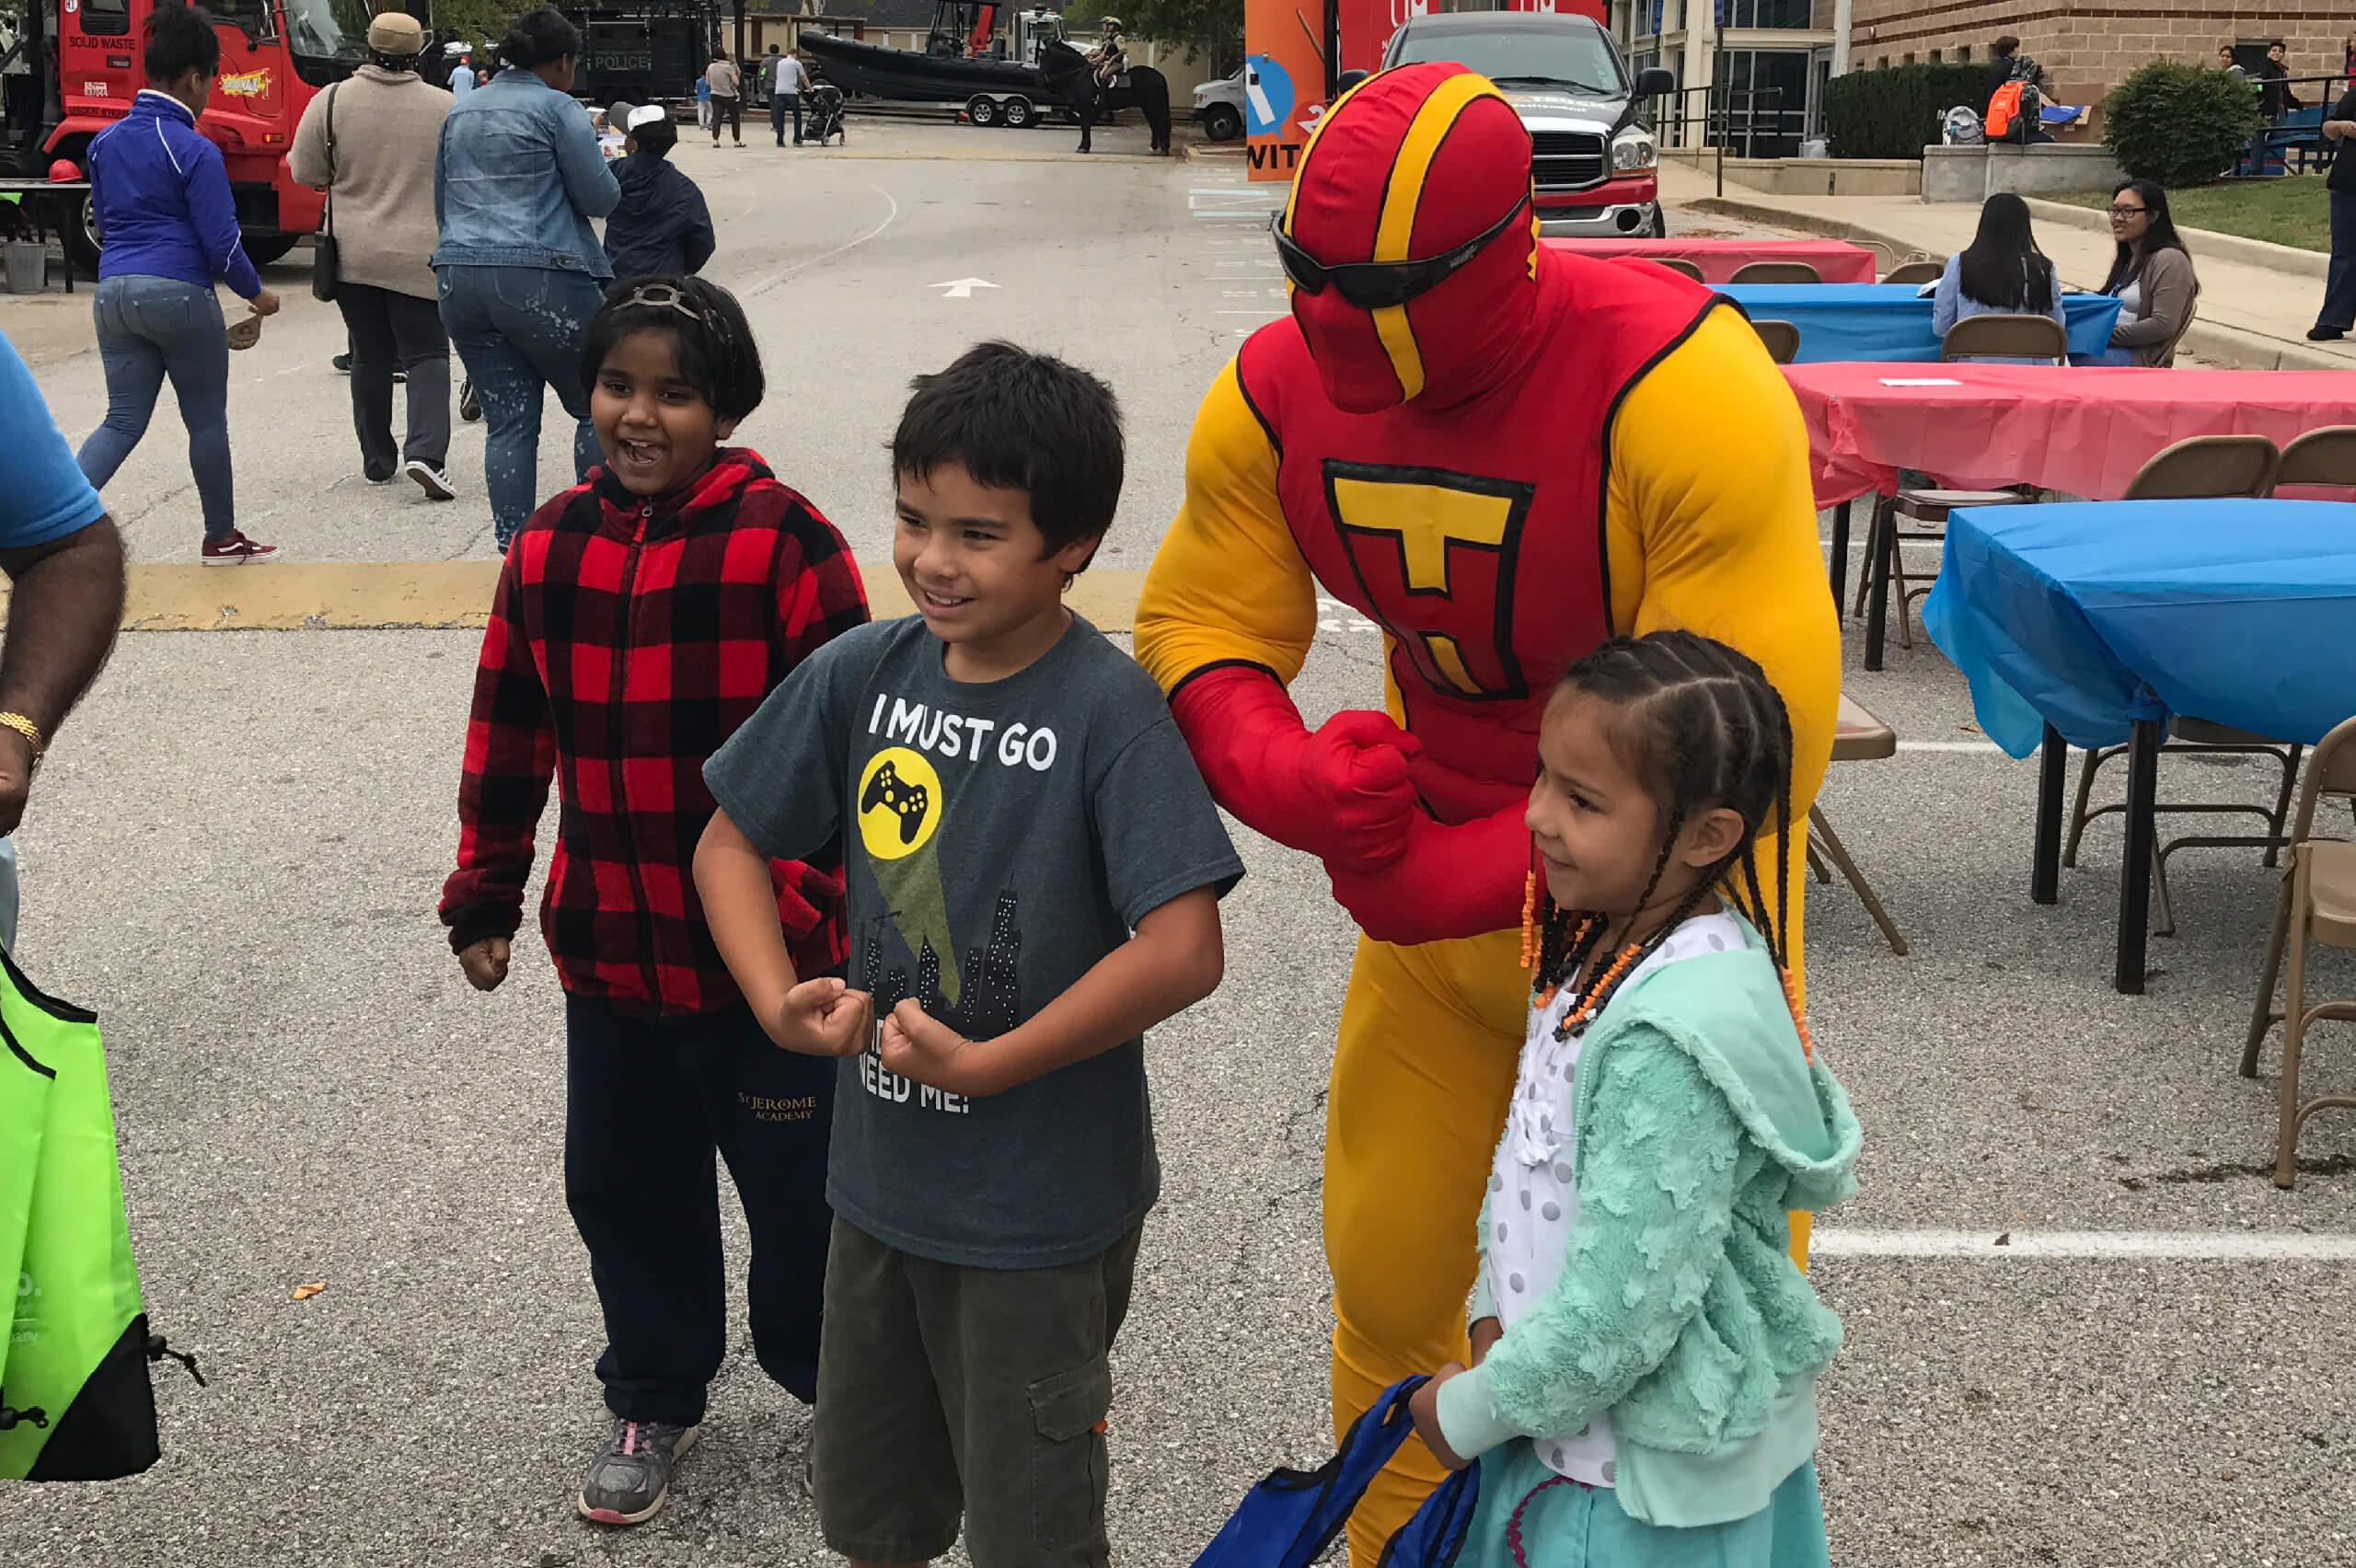 TurboHaul Man flexes his muscles with kids in Columbia, MD